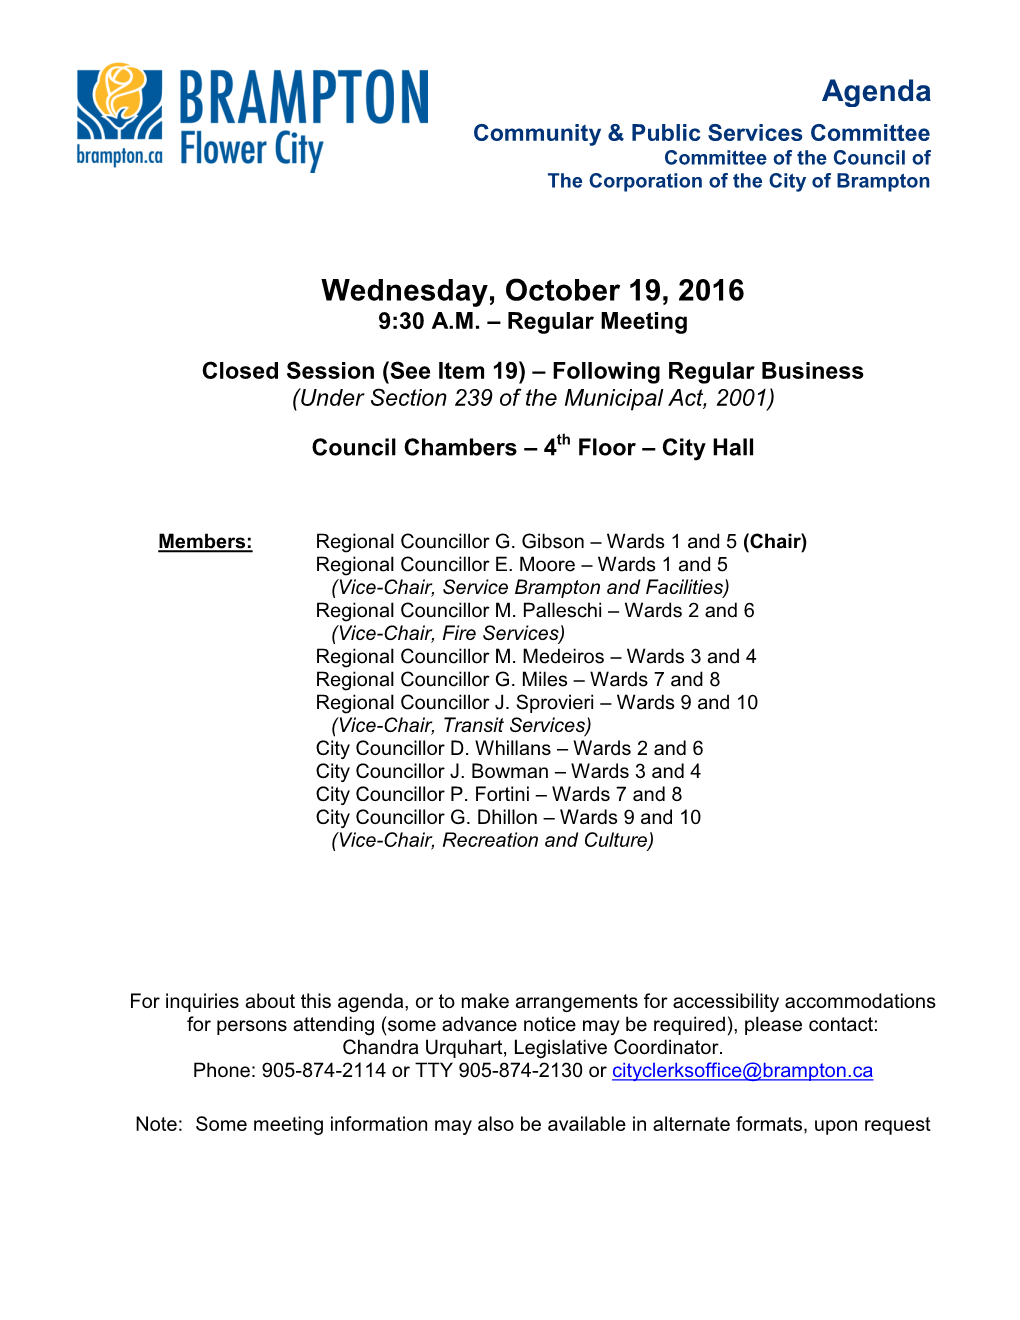 Community and Public Services Committee Agenda for October 19